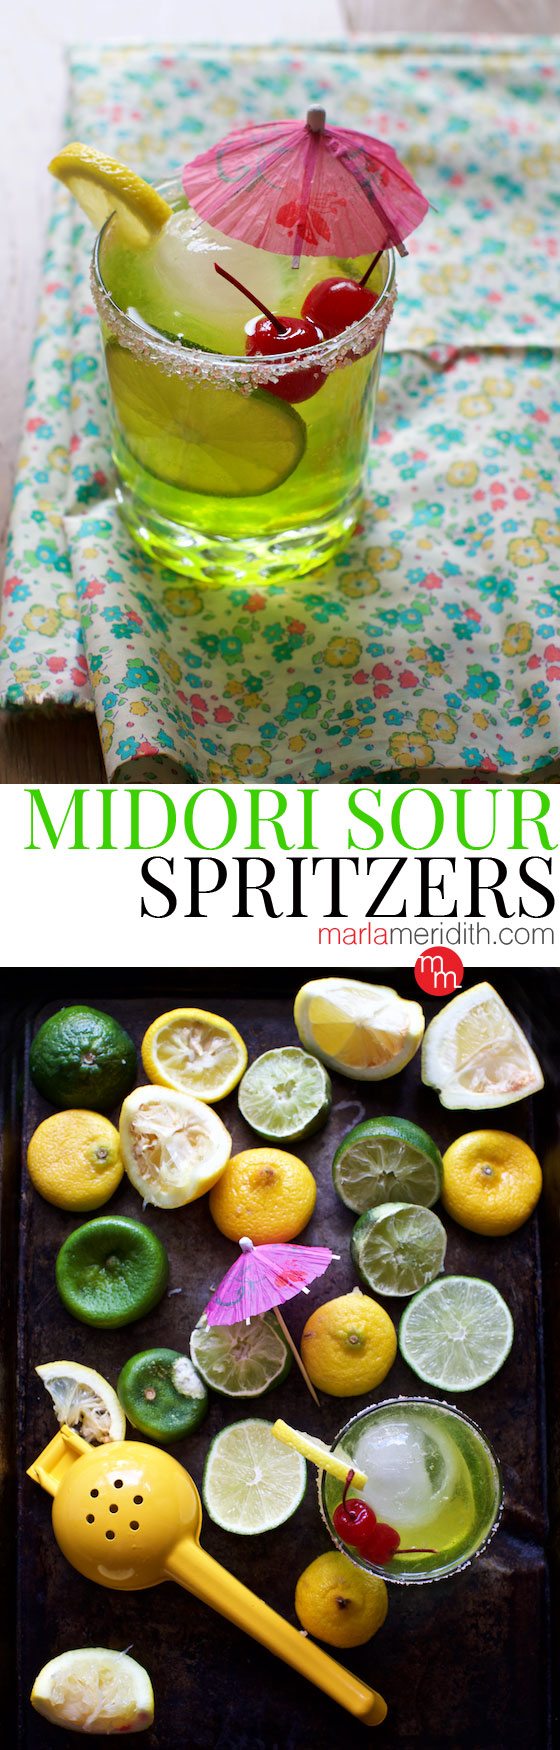 A refreshing summer #cocktail MIDORI SOUR SPRITZERS recipe. With a video demo! MarlaMeridith.com ( @marlameridith )